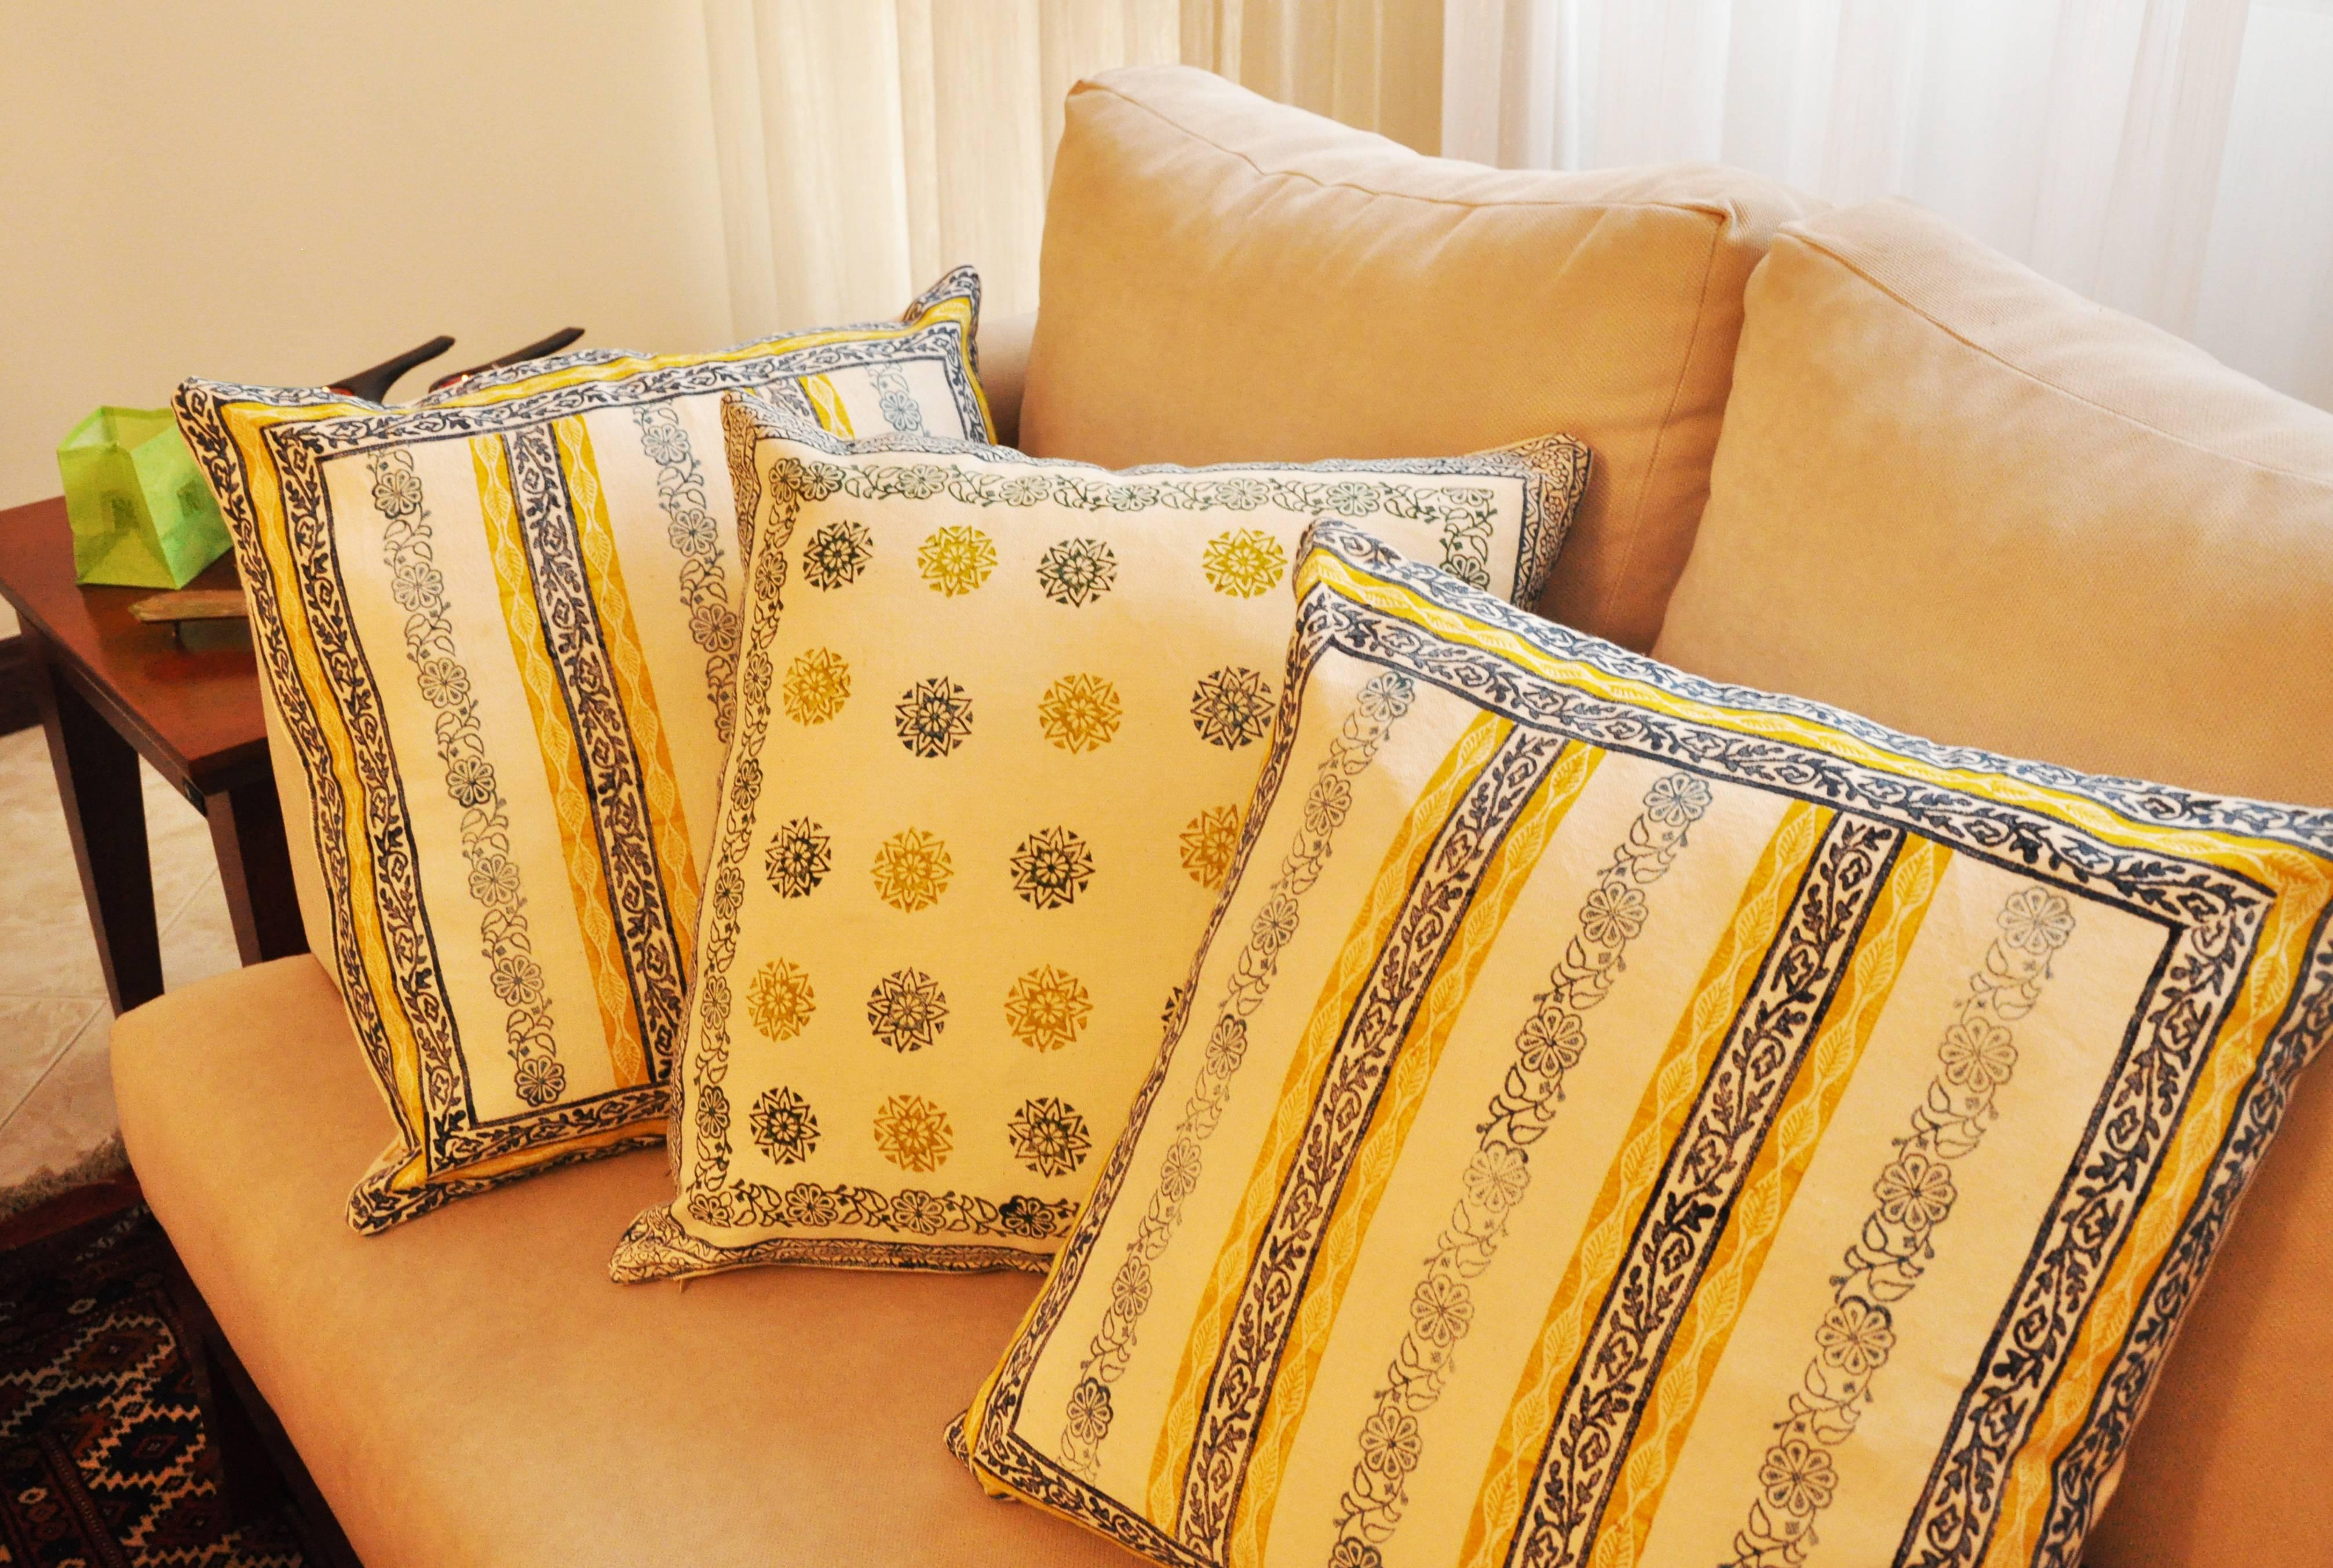 Decorative textile Qalamkar pillow handmade of tradition Persian ethnic people textile. Add a hand-printed of color and style to your living room with one of these beautifully handmade cushions.
It has been designed, hand-printed and sewn together